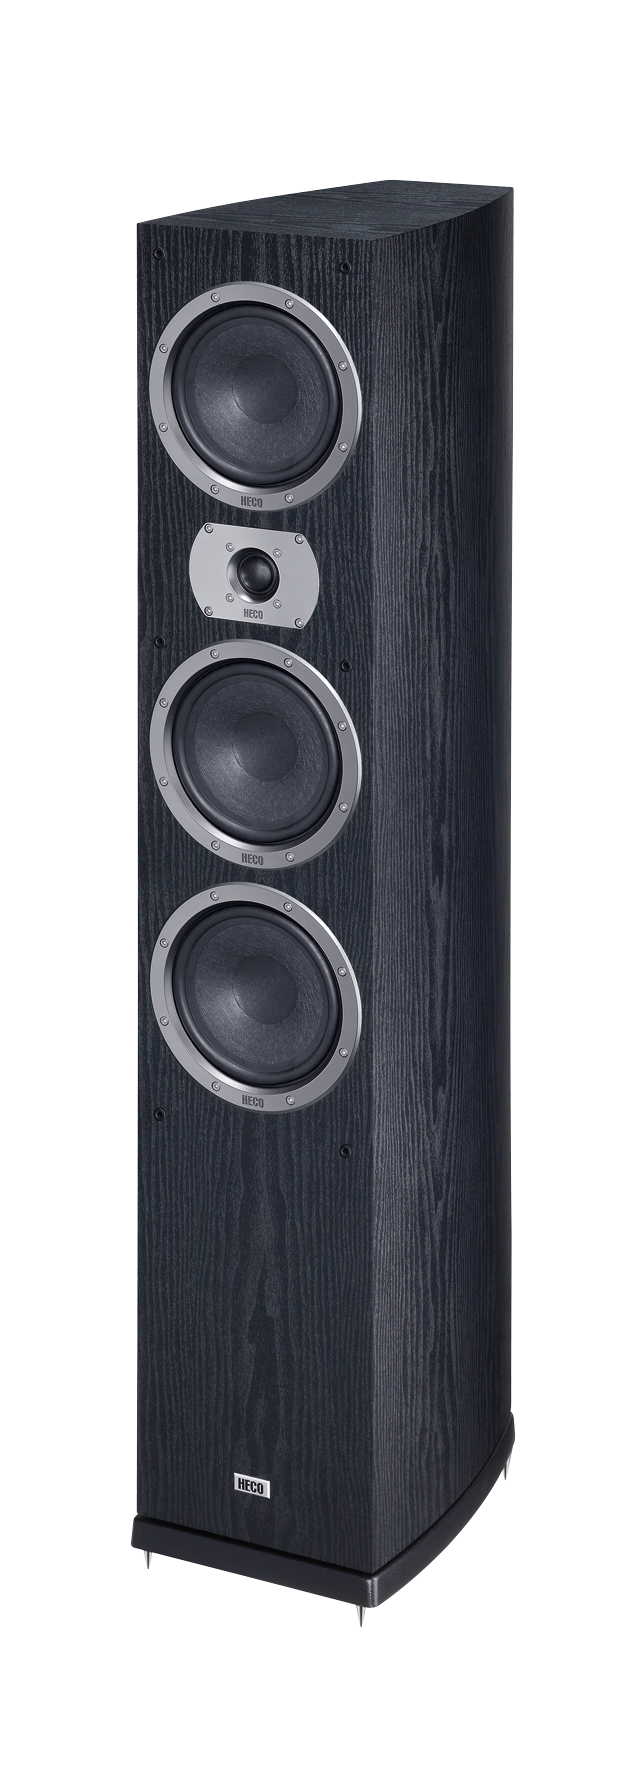 Victa Prime 702, 3-way floorstanding speaker, bass reflex configuration with double bass driver